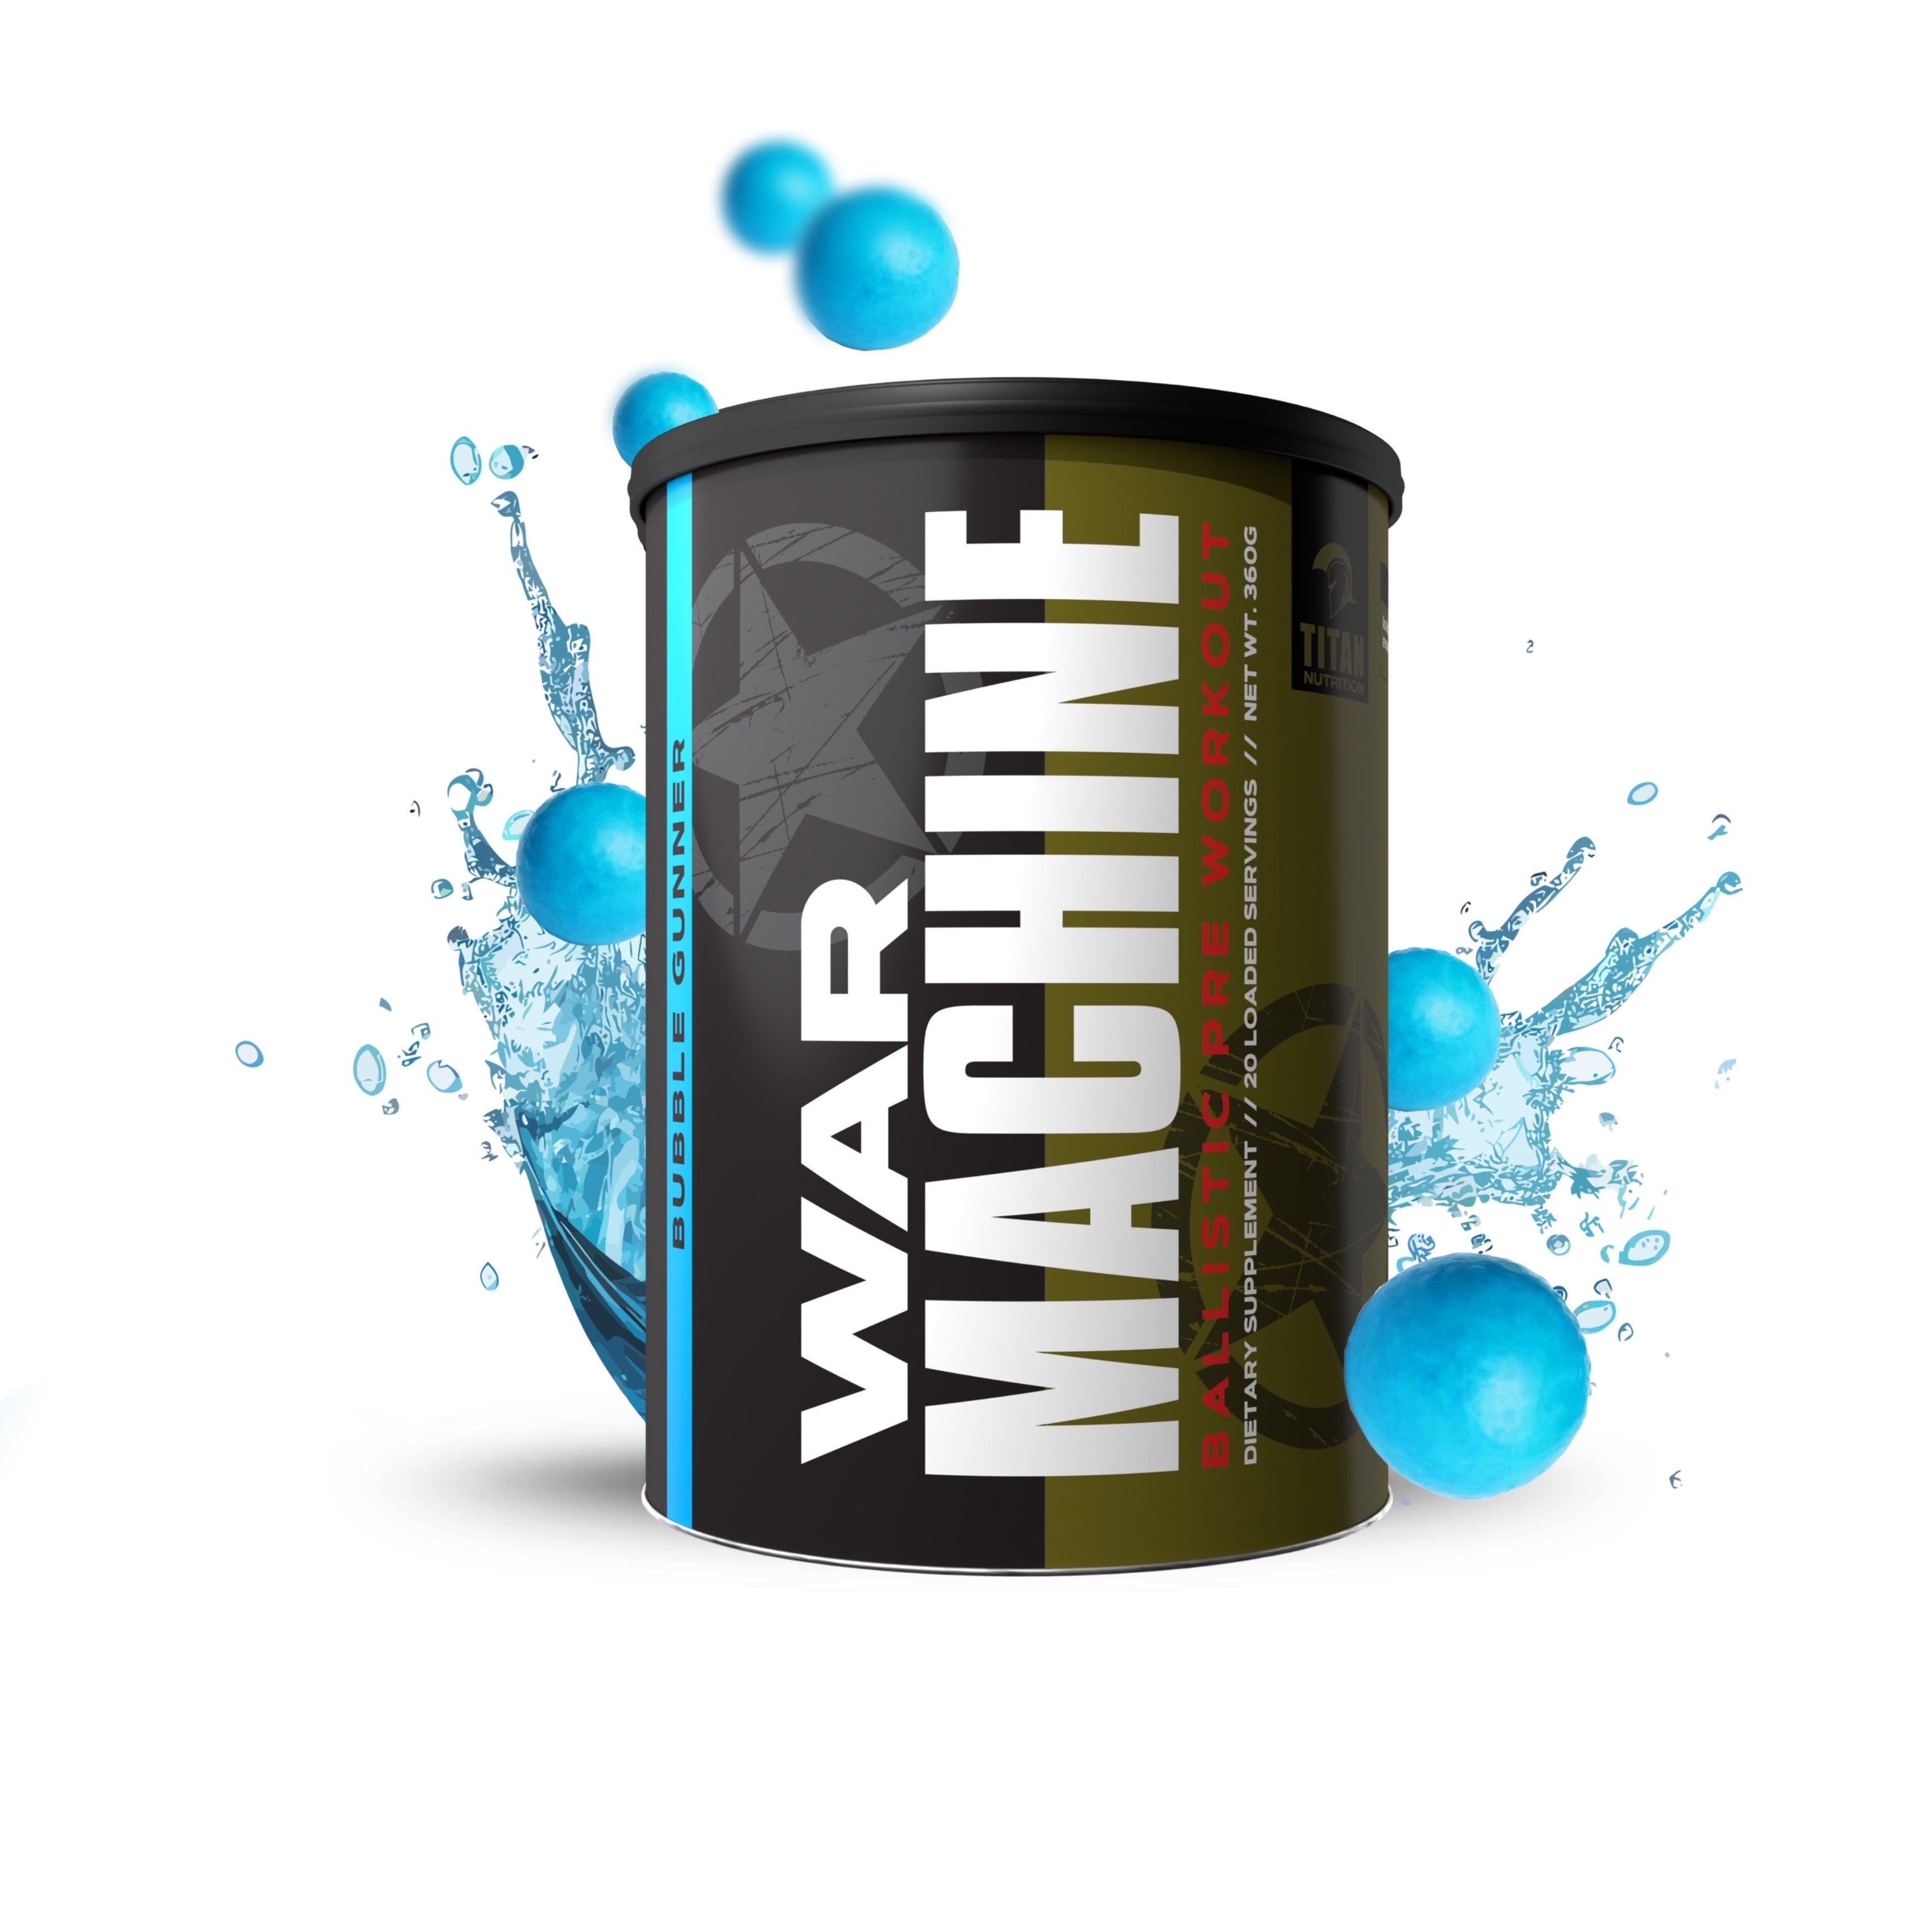 Titan Nutrition upcoming War Machine promises energy, focus and pumps